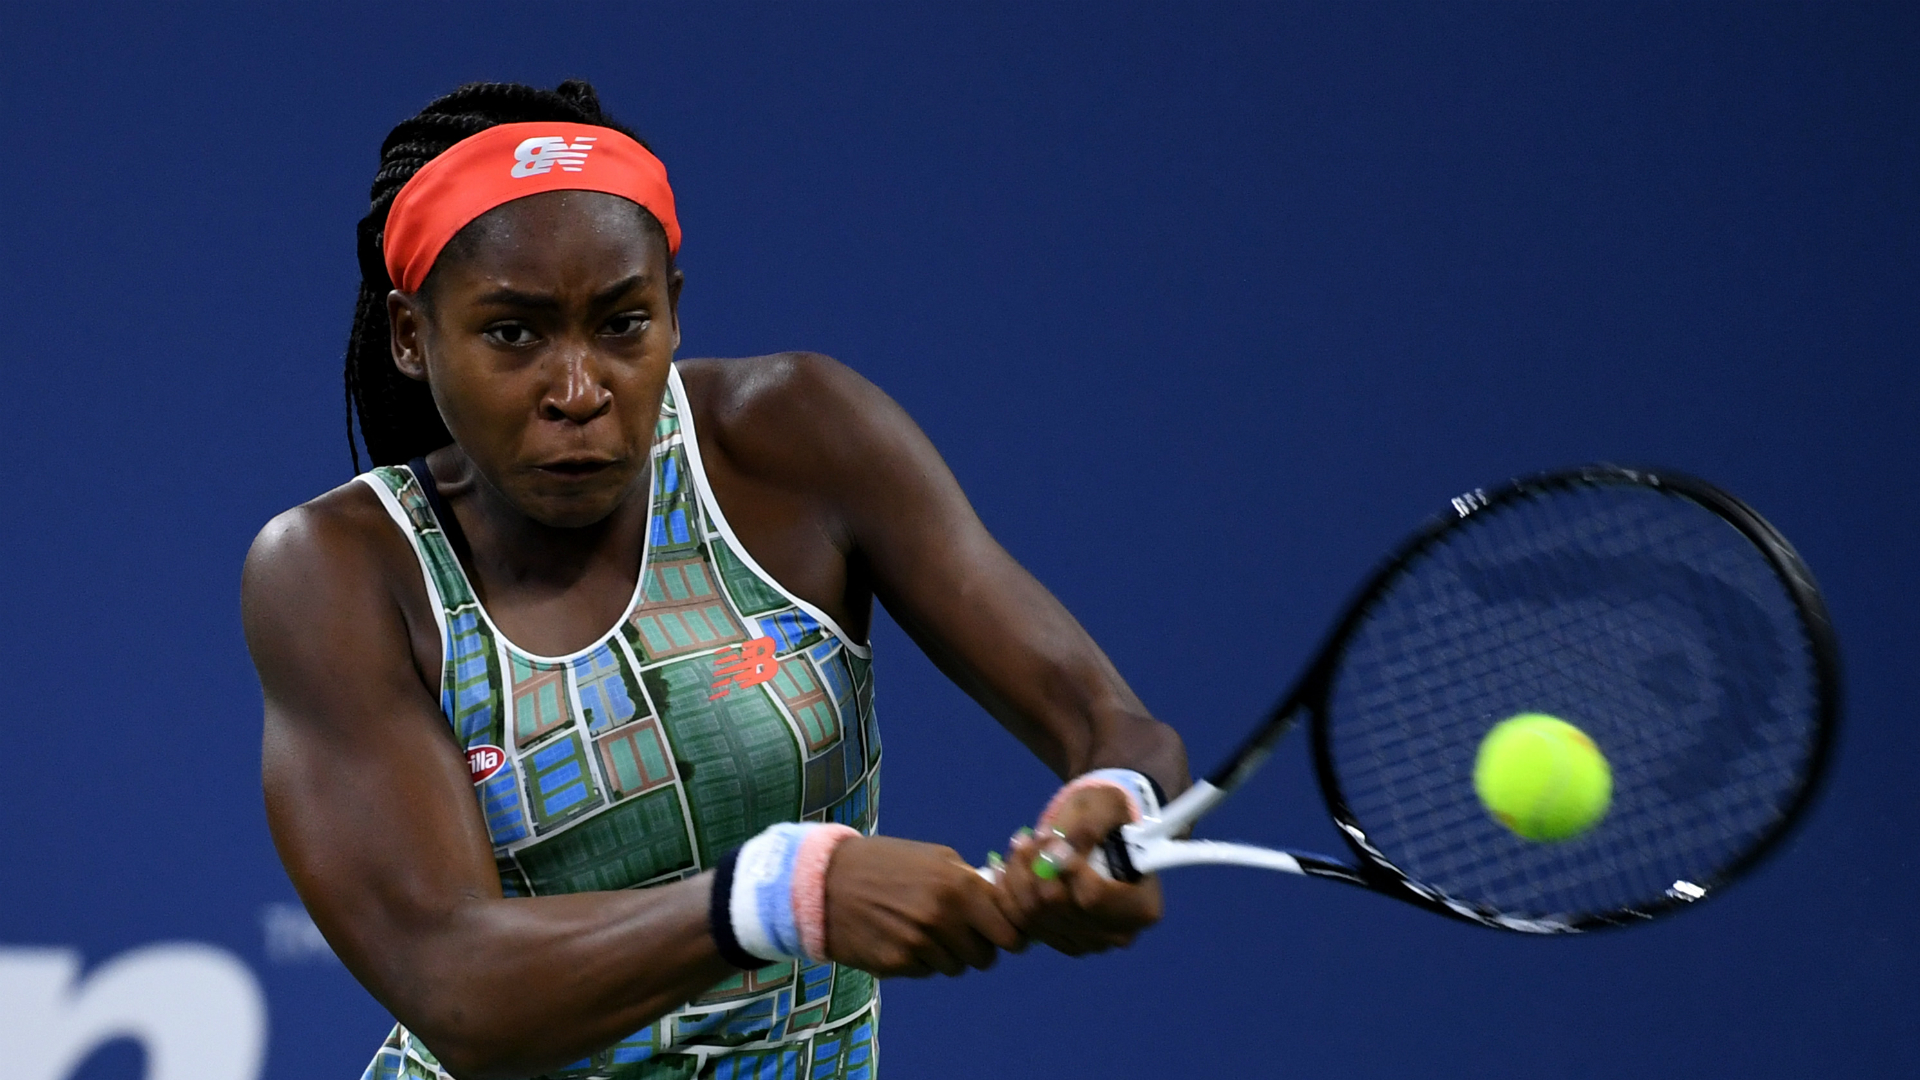 U.S. Open: Coco Gauff's emergence has caused quite a stir, but is the scrutiny healthy ...1920 x 1080